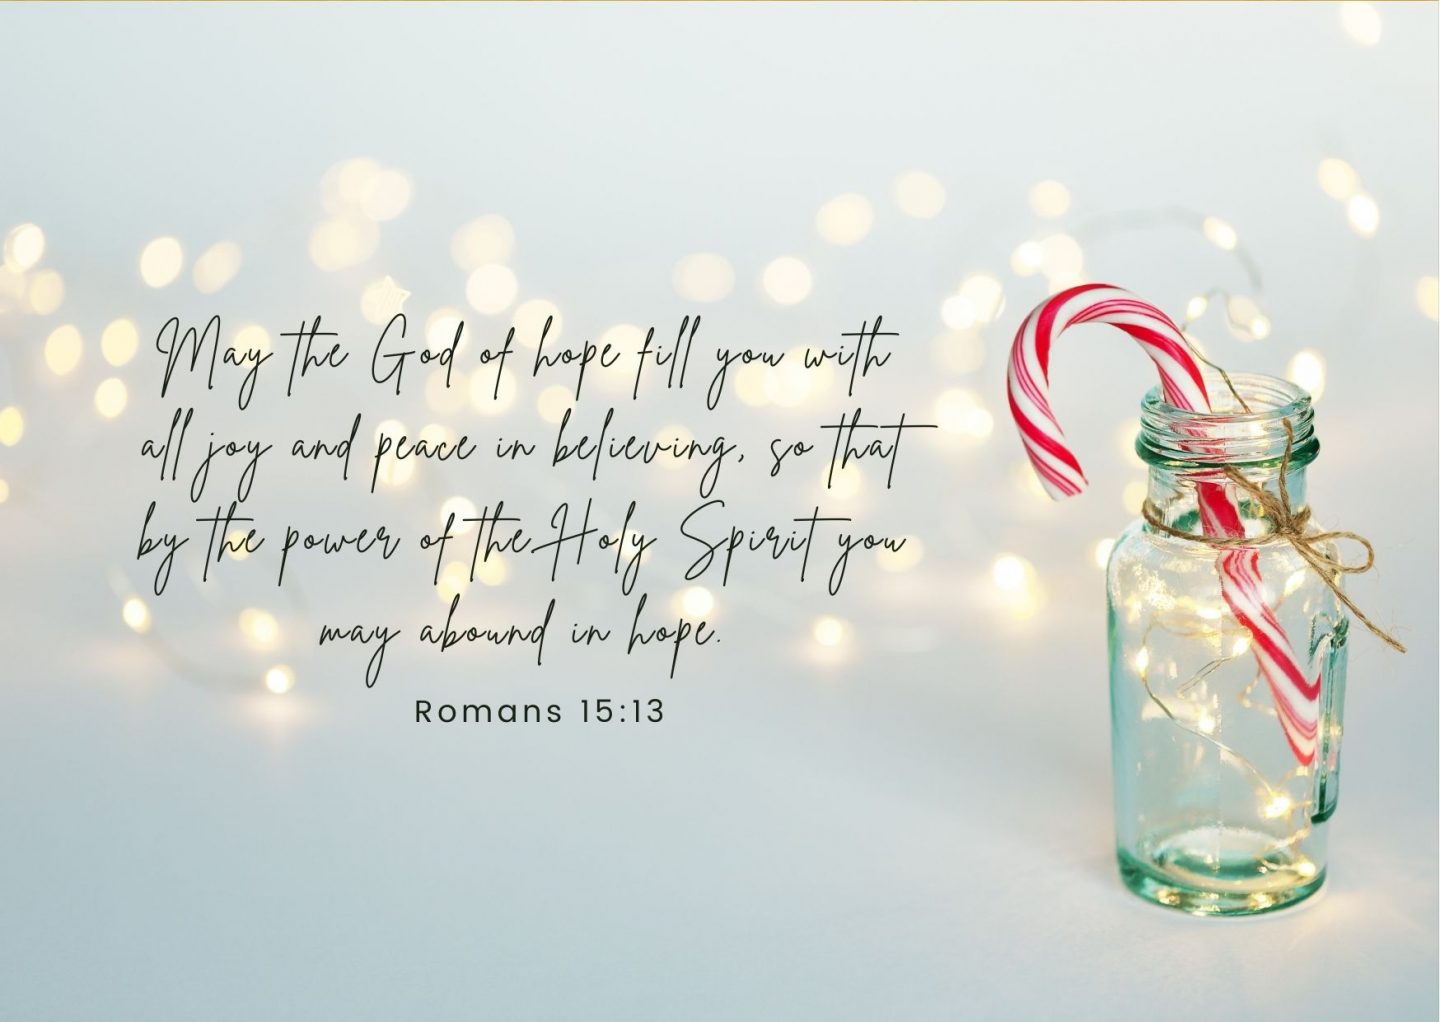 May the God of hope fill you with all joy and peace in believing, so that by the power of the Holy Spirit you may abound in hope. Romans 15:13